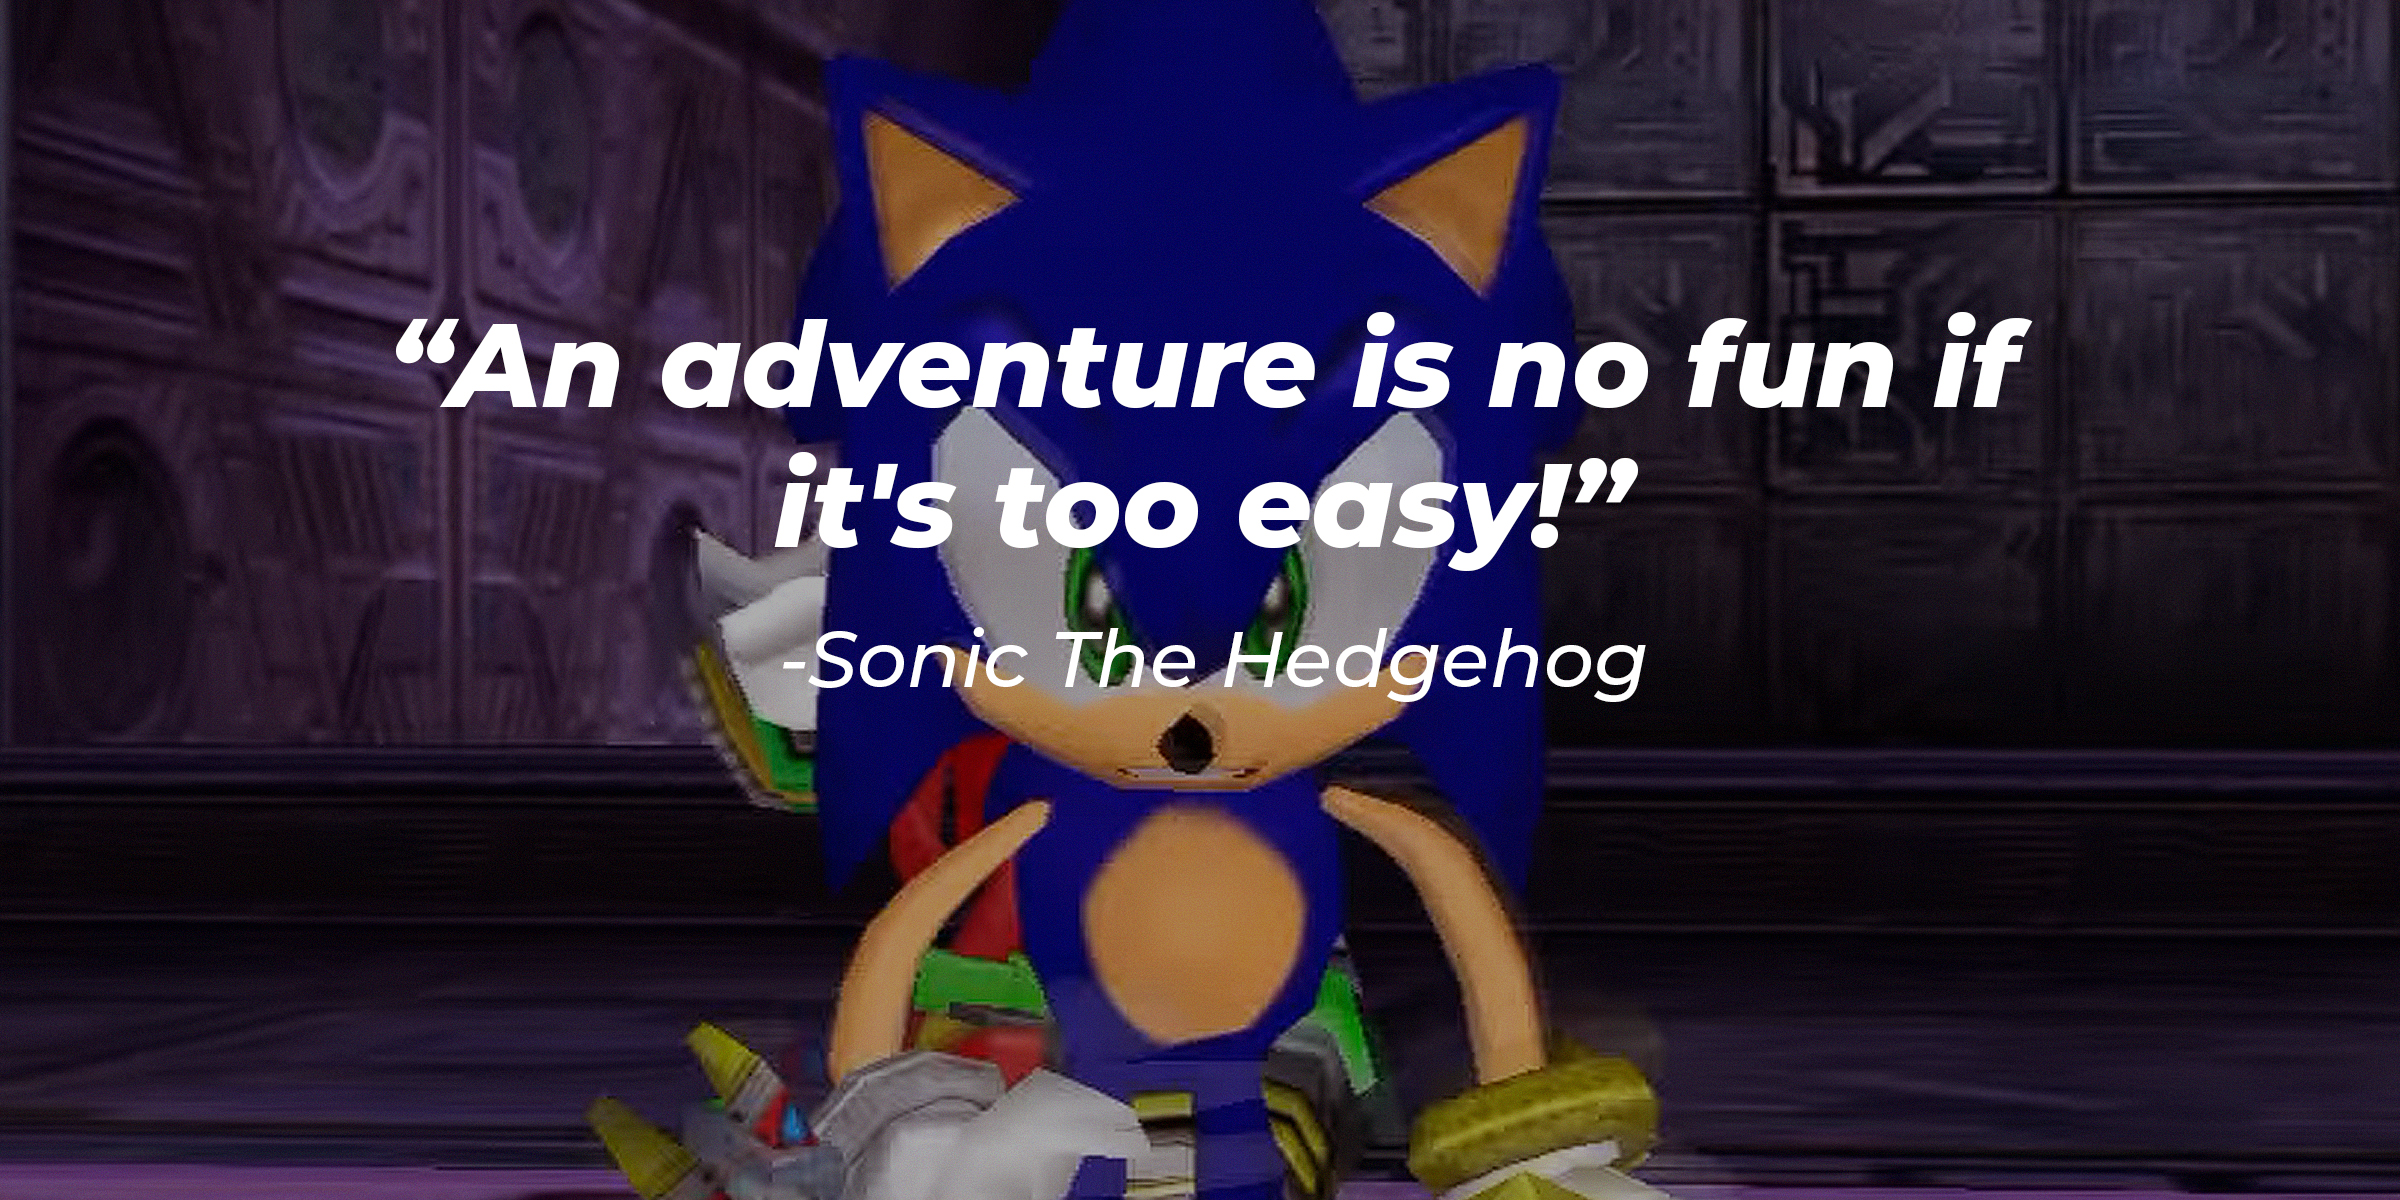 Sonic the Hedgehog with his quote: "An adventure is no fun if it's too easy!" | Source: youtube.com/SEGA_Wes